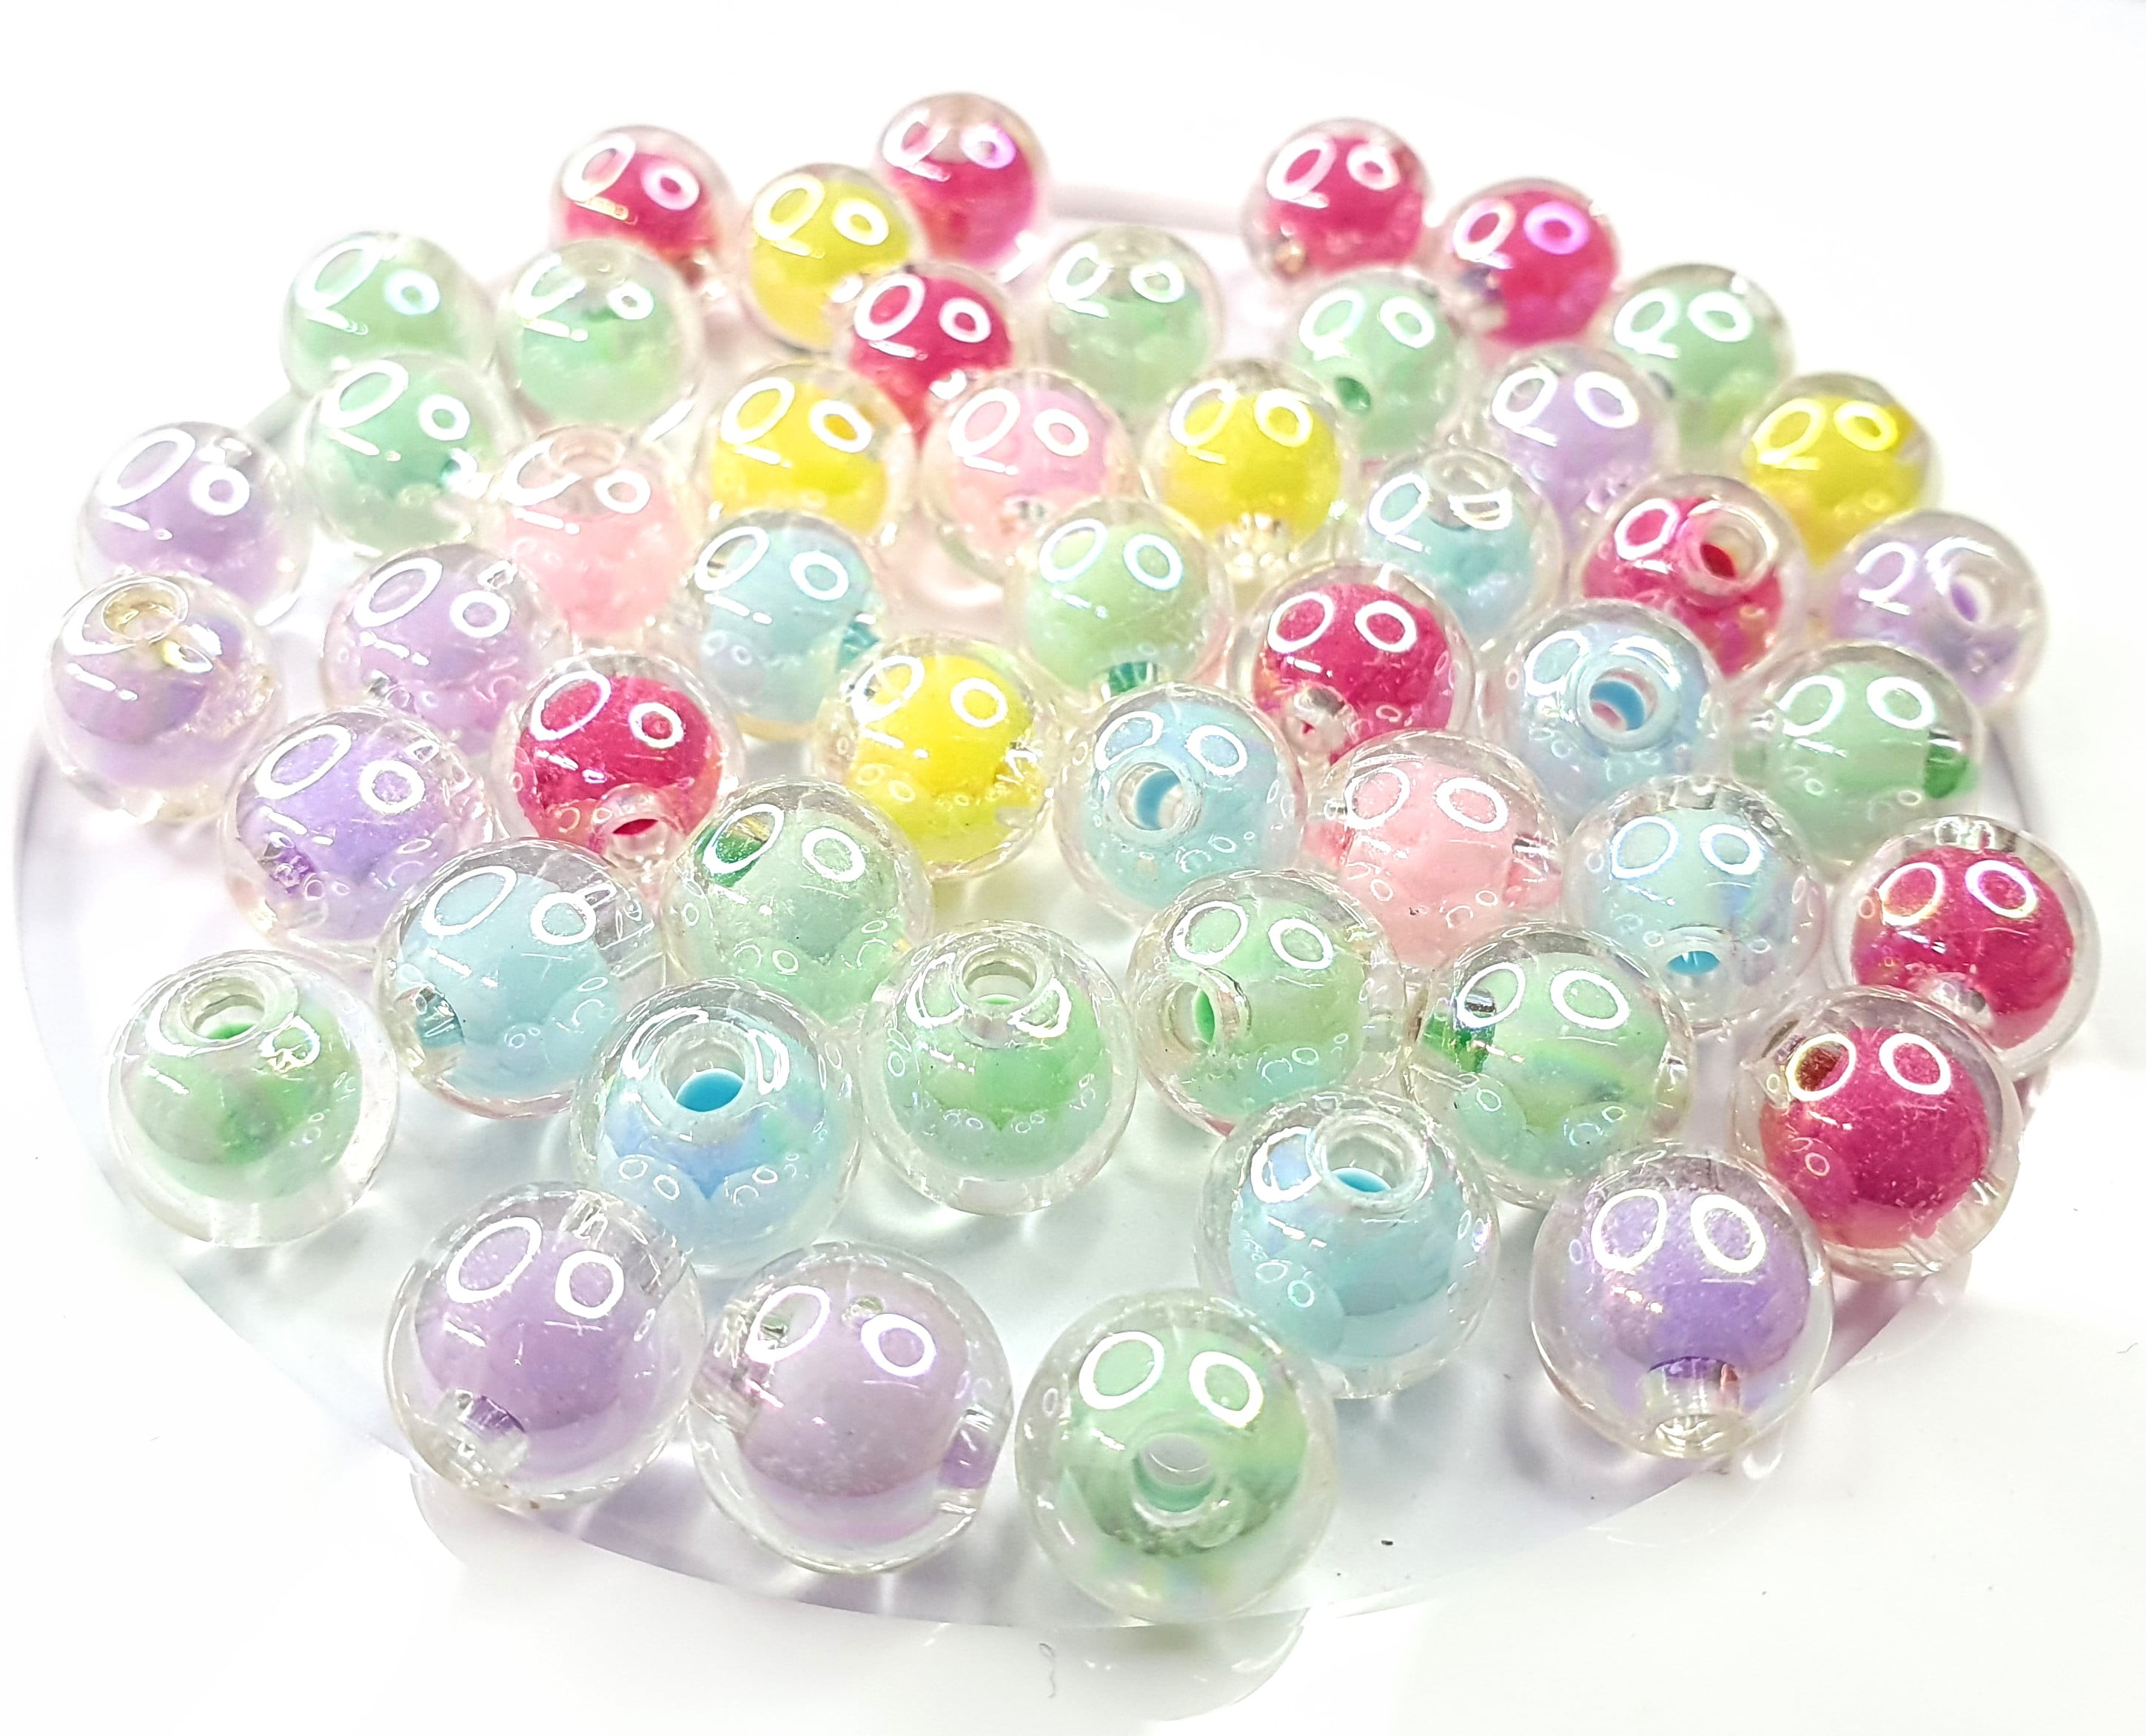 CONTA BOLA LISA 9,7MM CANDY COLORS 25GR  